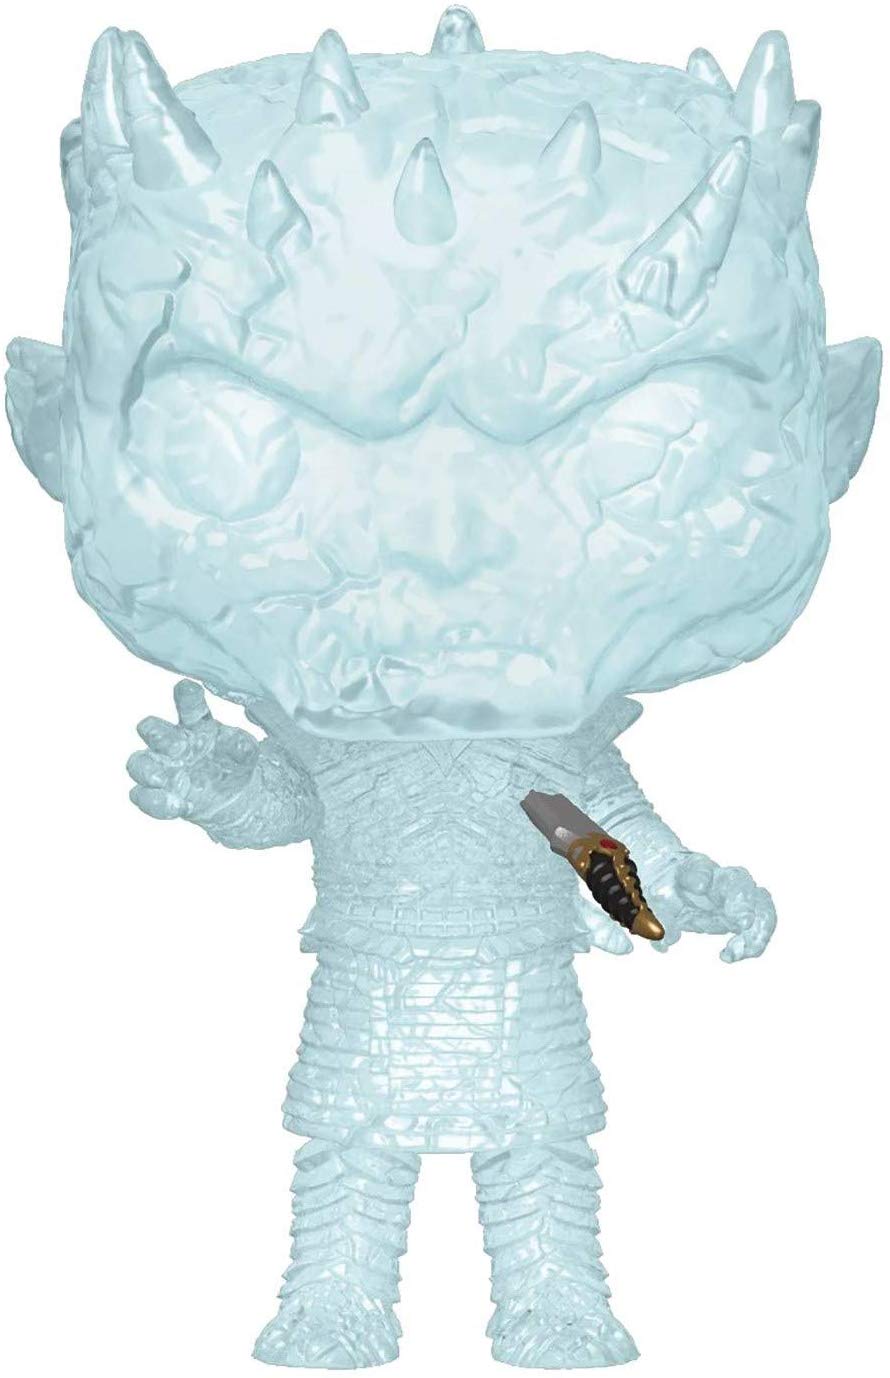 Funko POP! Game of Thrones: Crystal Night King with Dagger in Chest Vinyl Figure